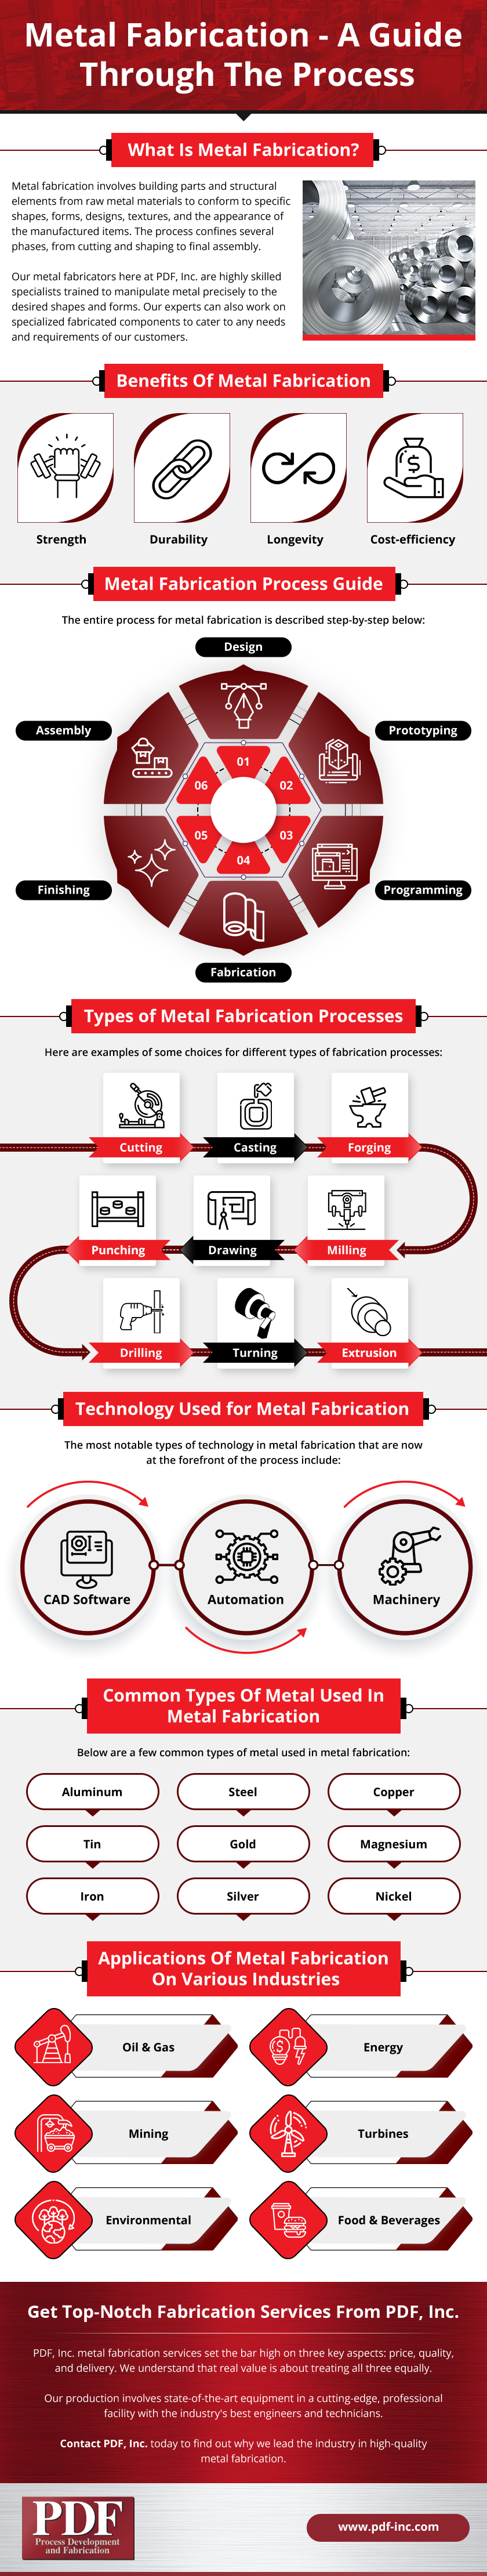 Metal-Fabrication-A-Guide-Through-The-Process